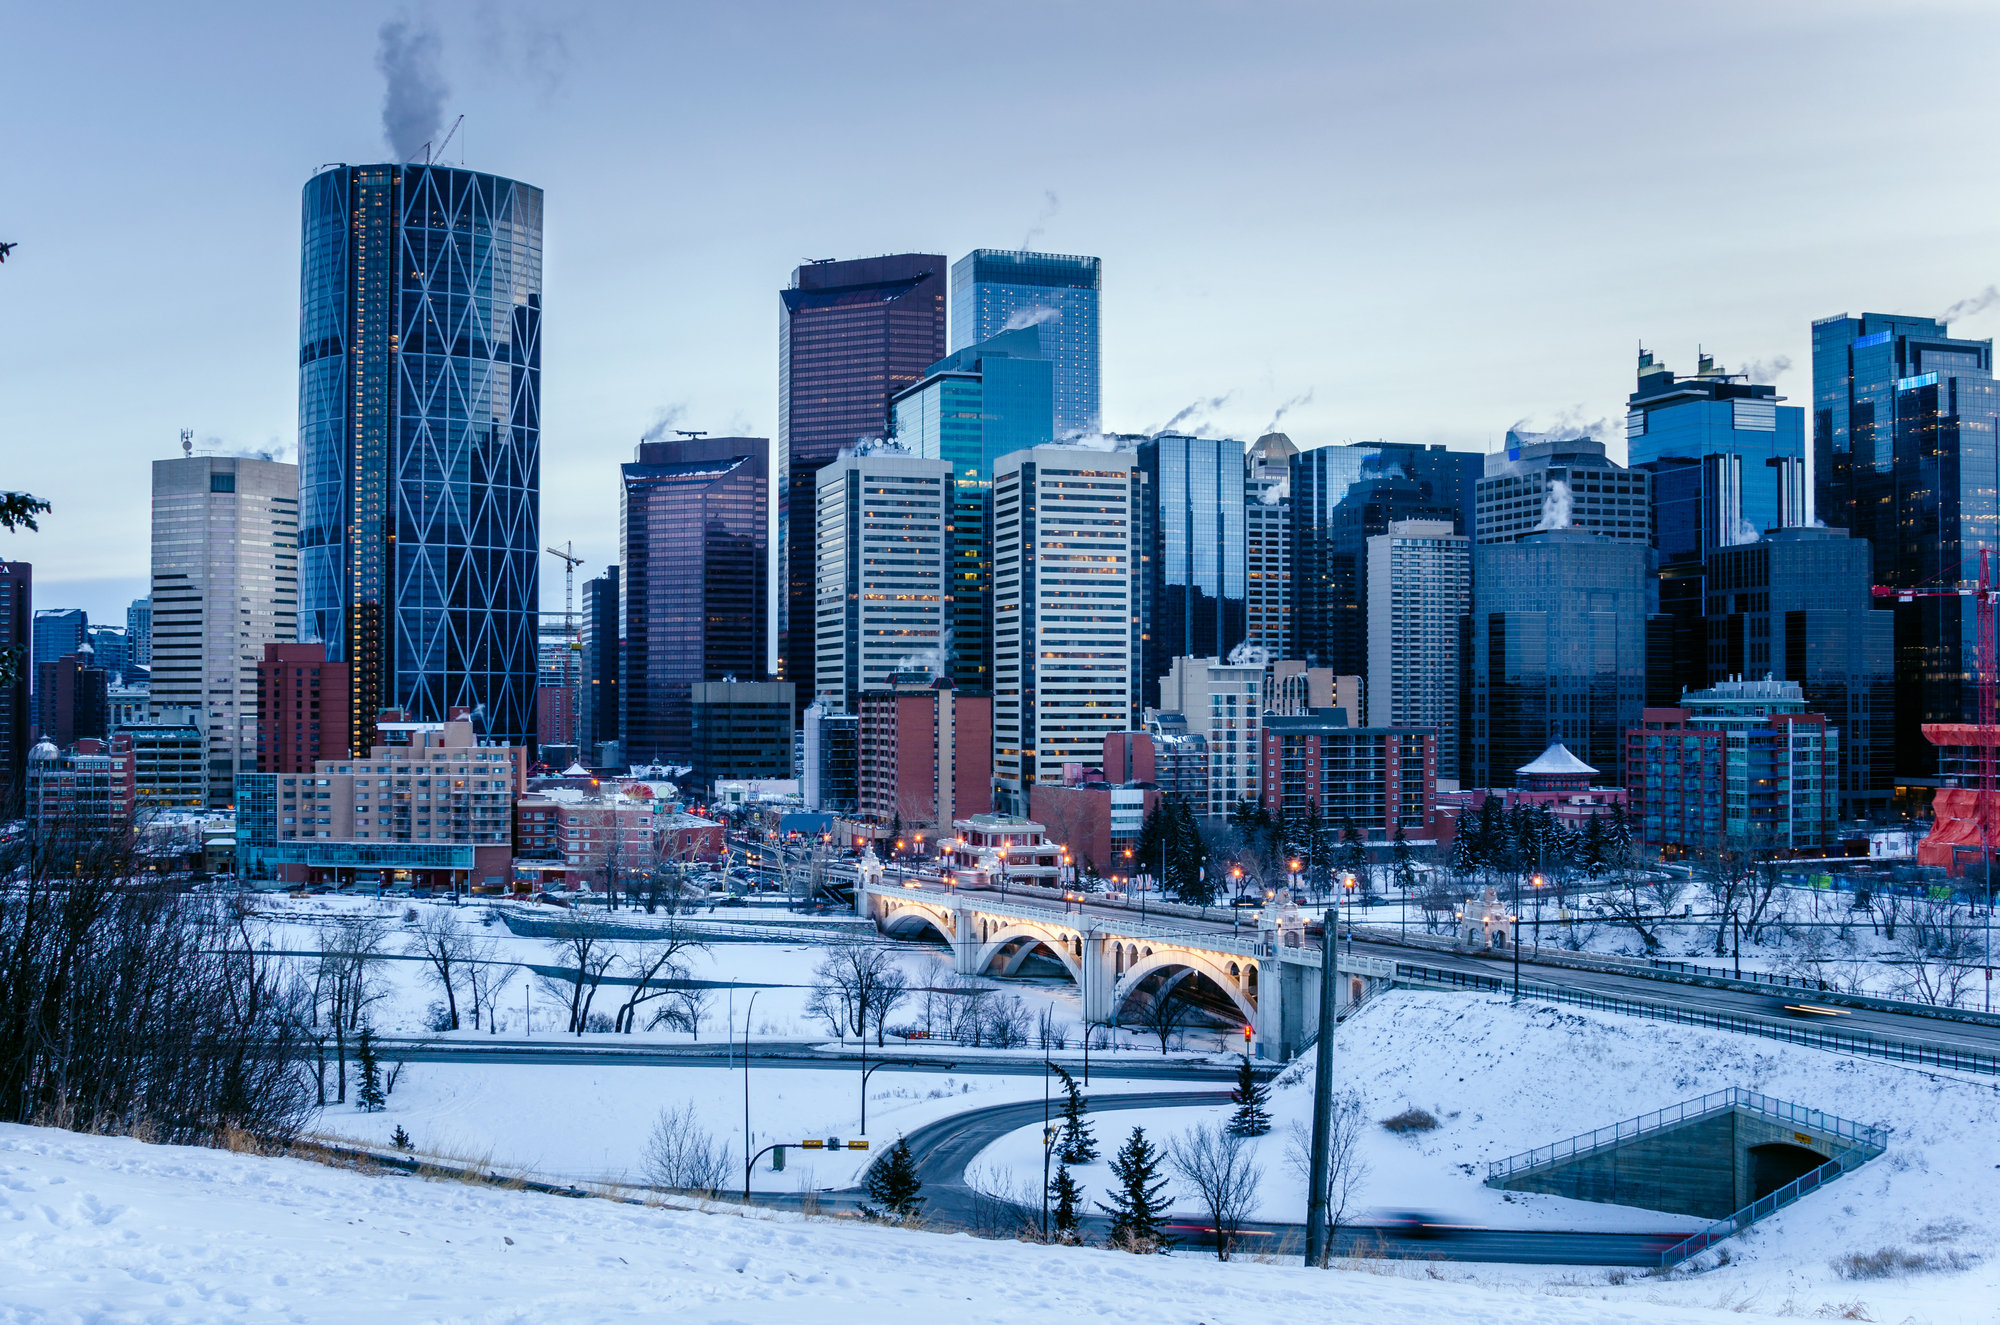 Highrises in Downtown Calgary during the winter time